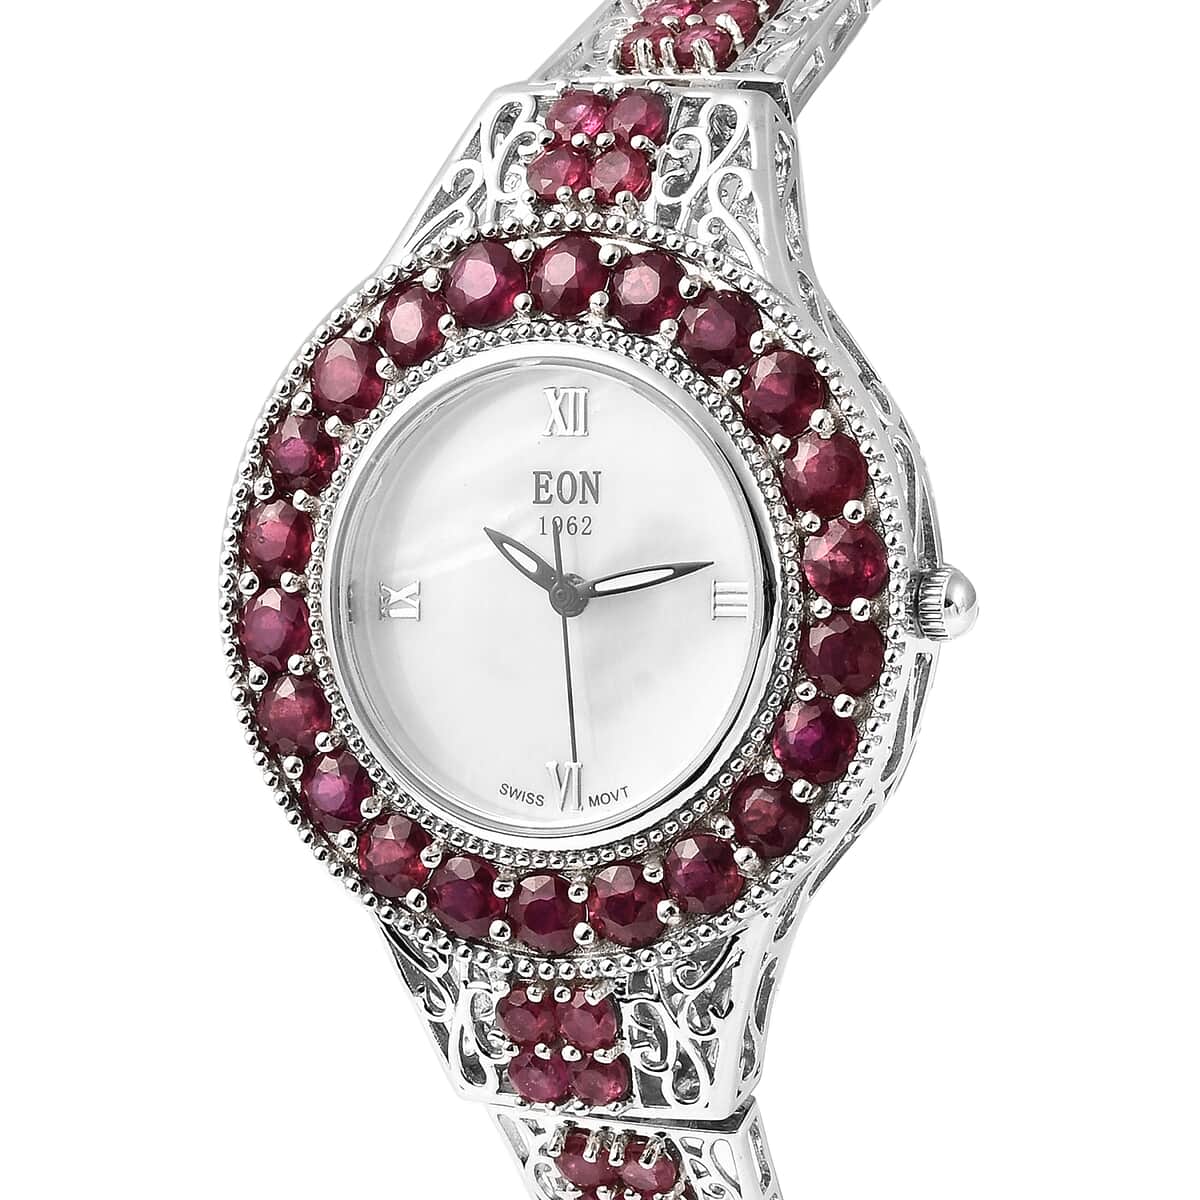 EON 1962 Niassa Ruby Swiss Movement Watch in Sterling Silver (38 g) image number 3